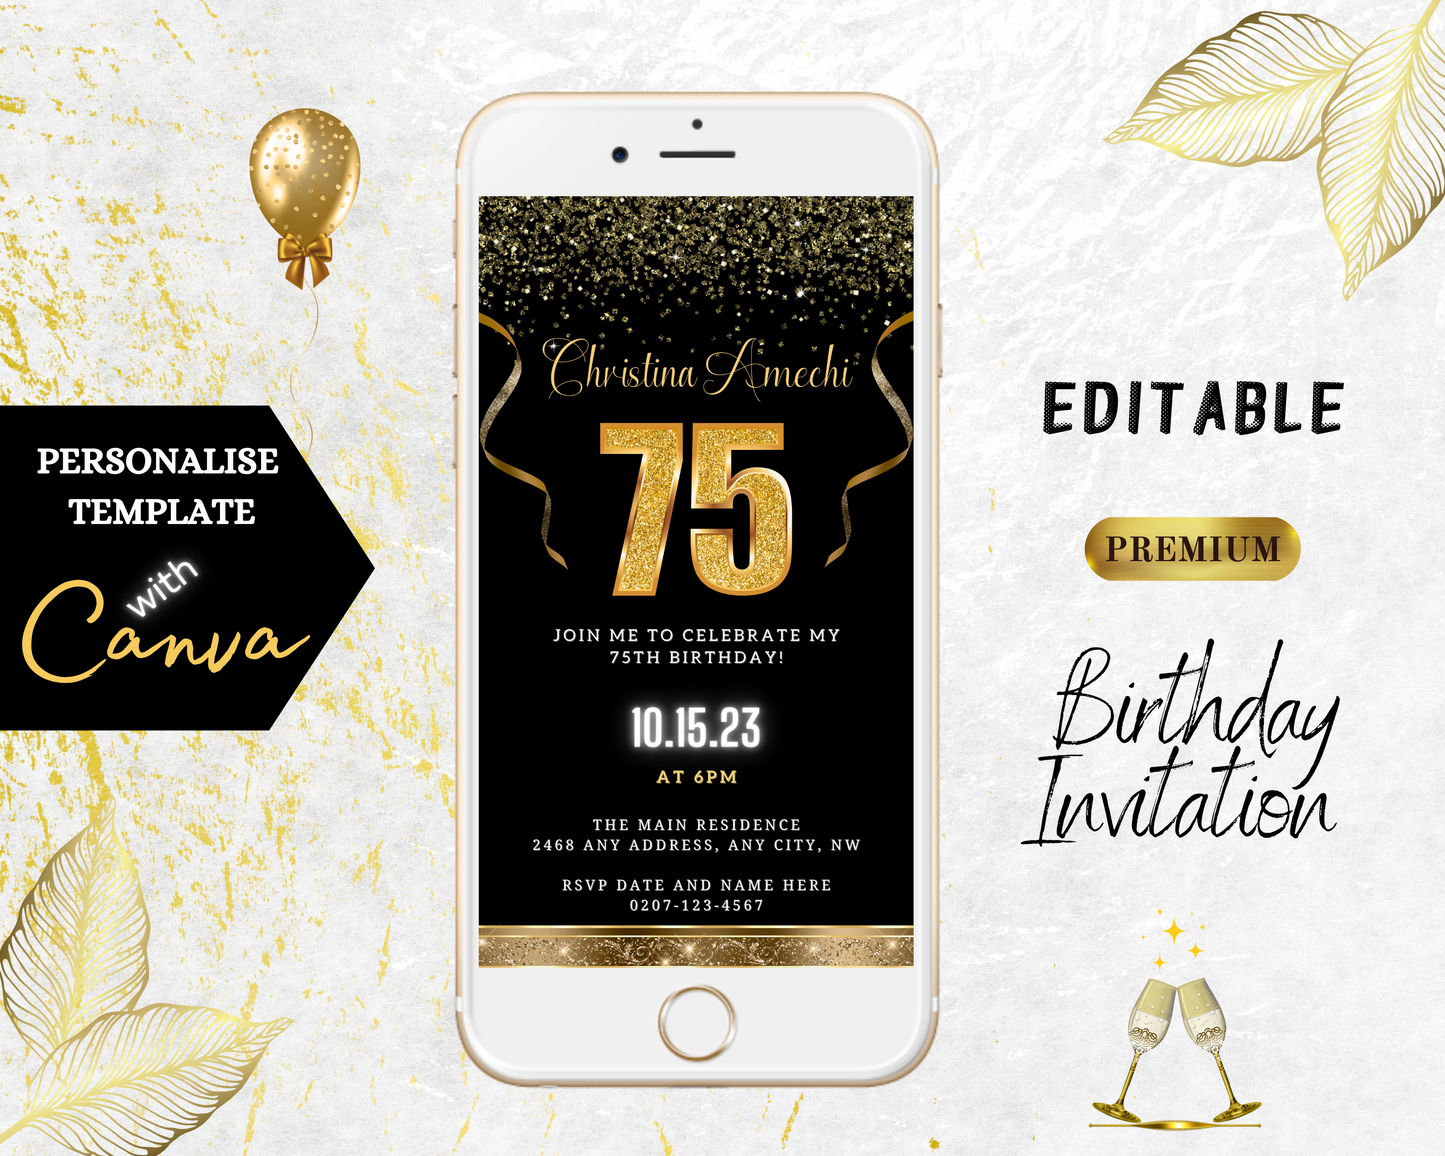 Customizable Digital Black Gold Confetti 75th Birthday Evite displayed on a white smartphone screen with gold text and celebratory balloons in the background.